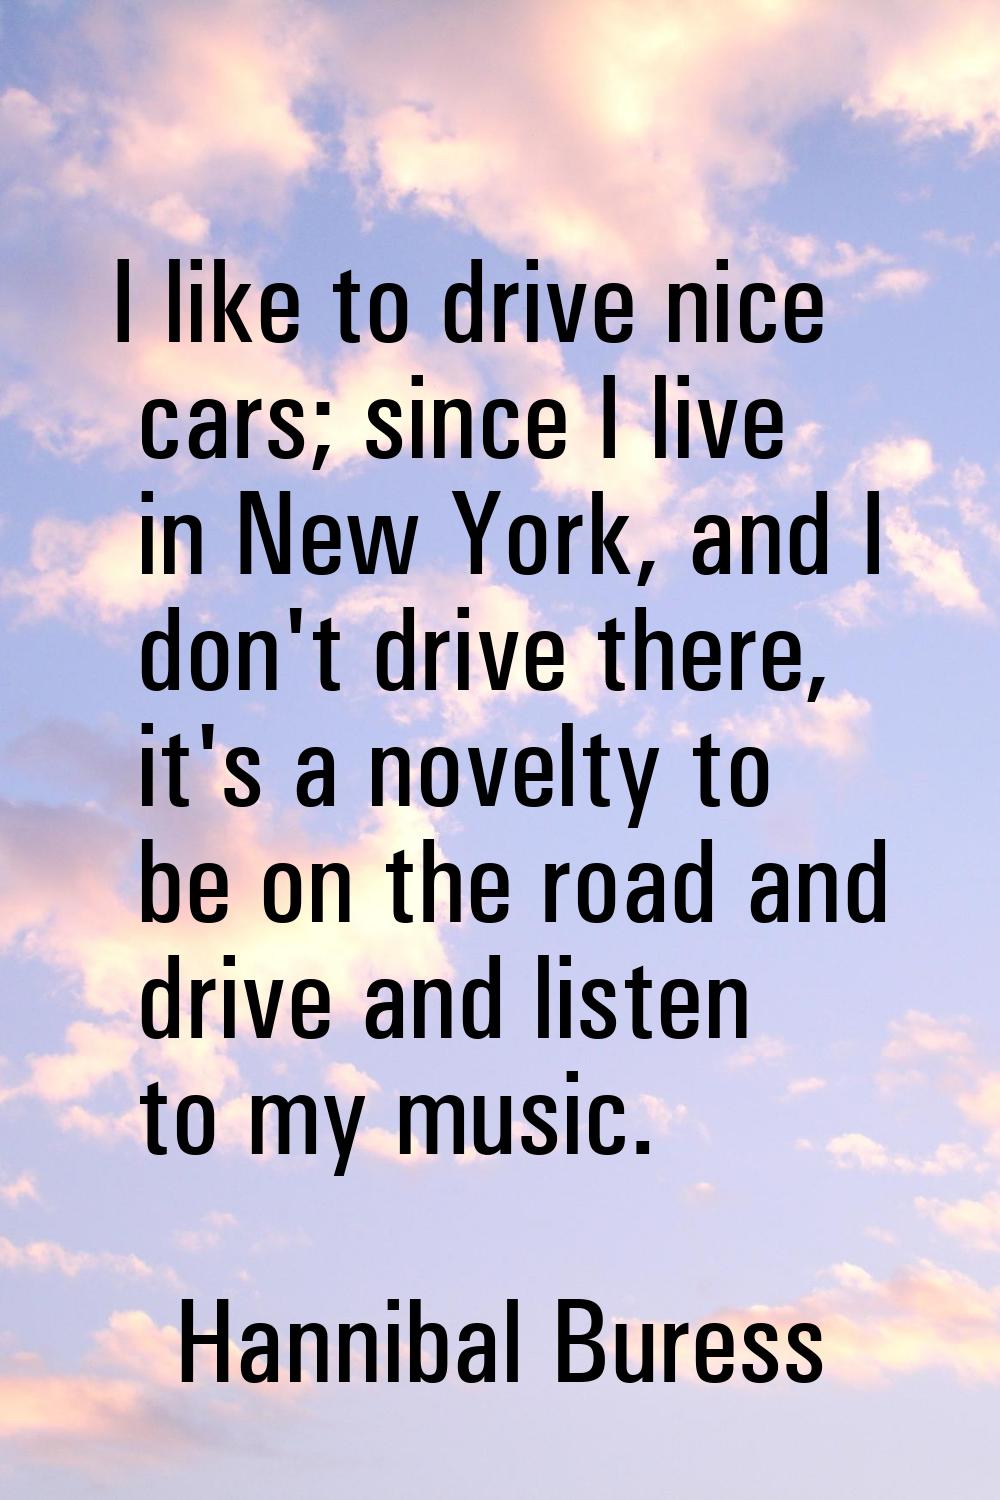 I like to drive nice cars; since I live in New York, and I don't drive there, it's a novelty to be 